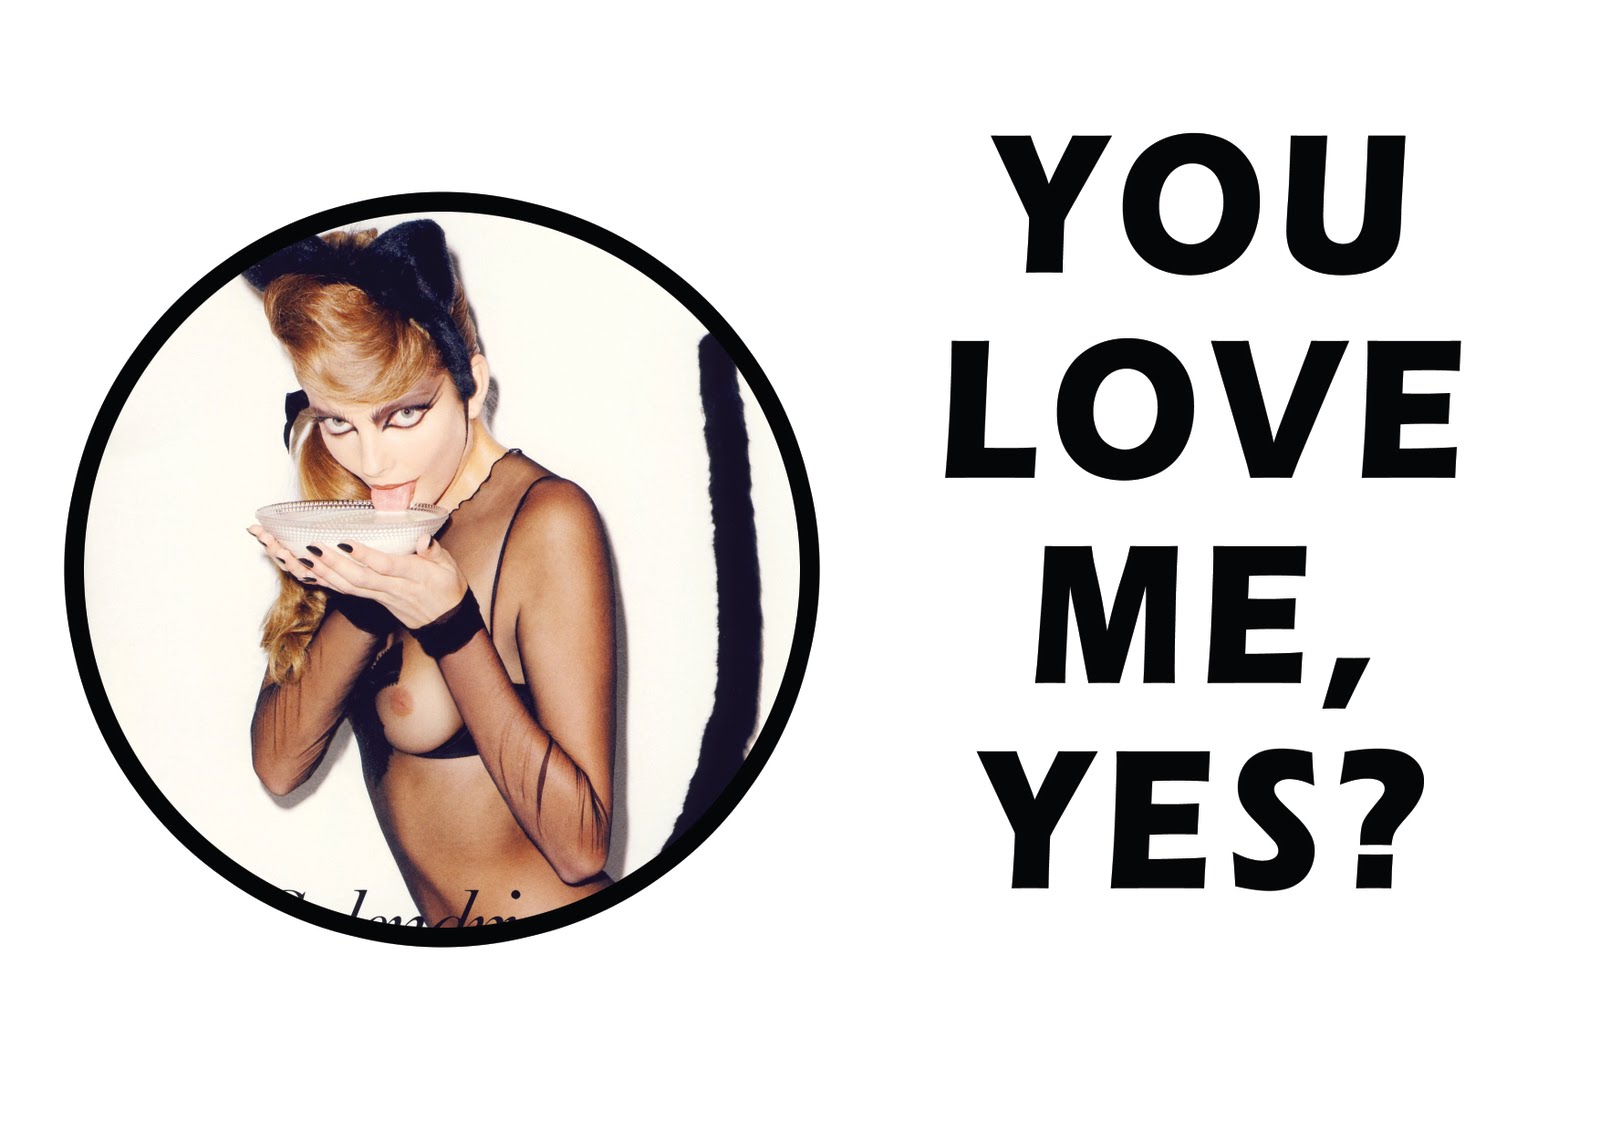 You love me, yes?